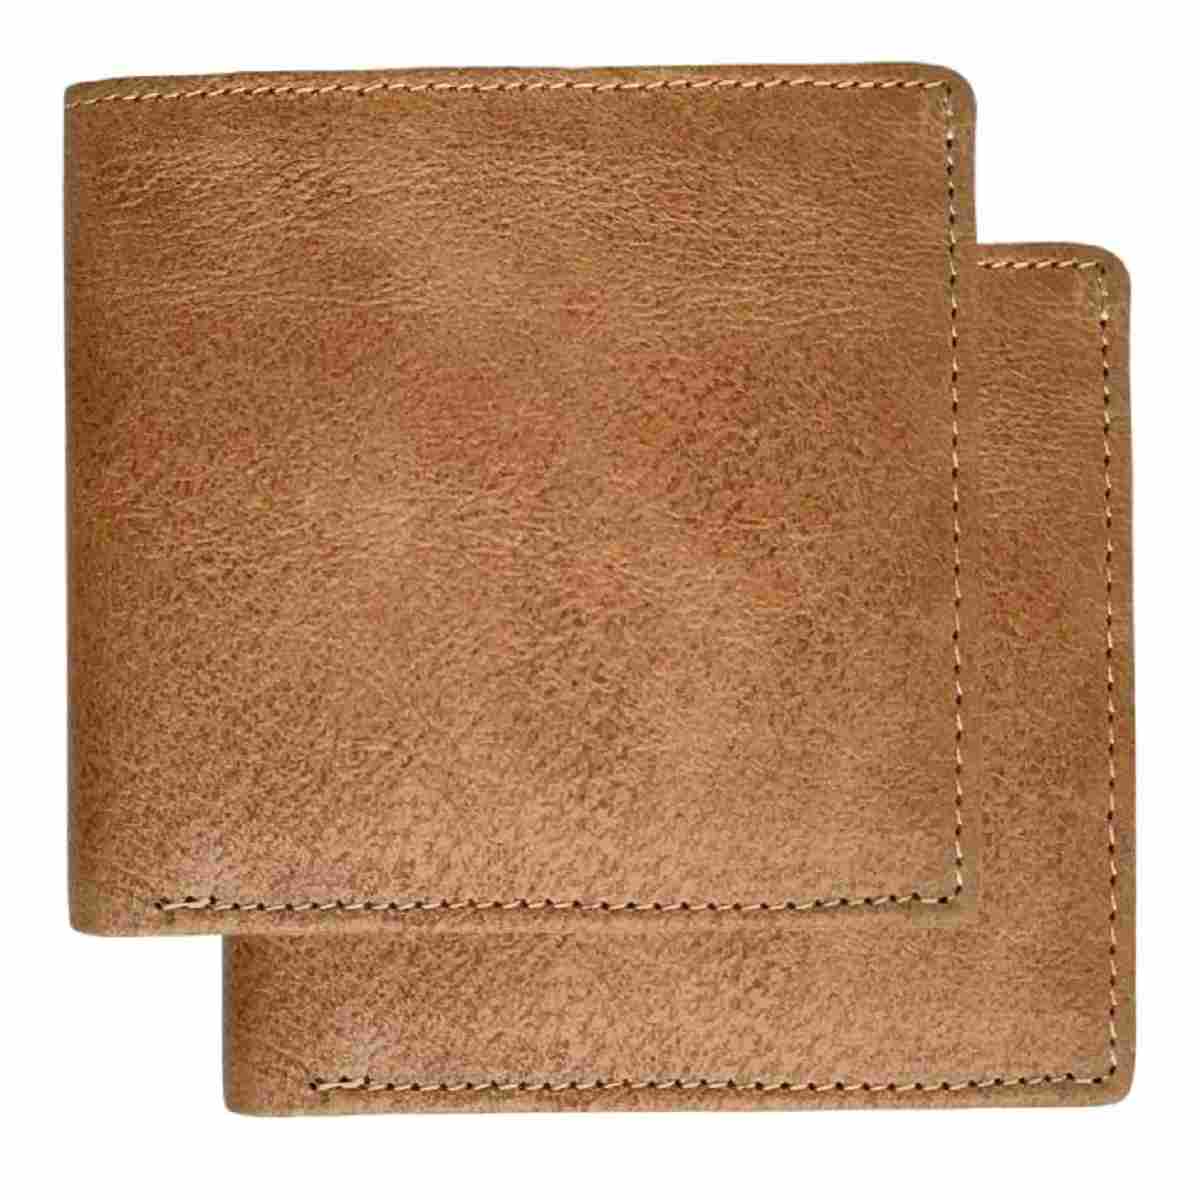 E2022 Crust Leather Wallets for Men Pack of 2--